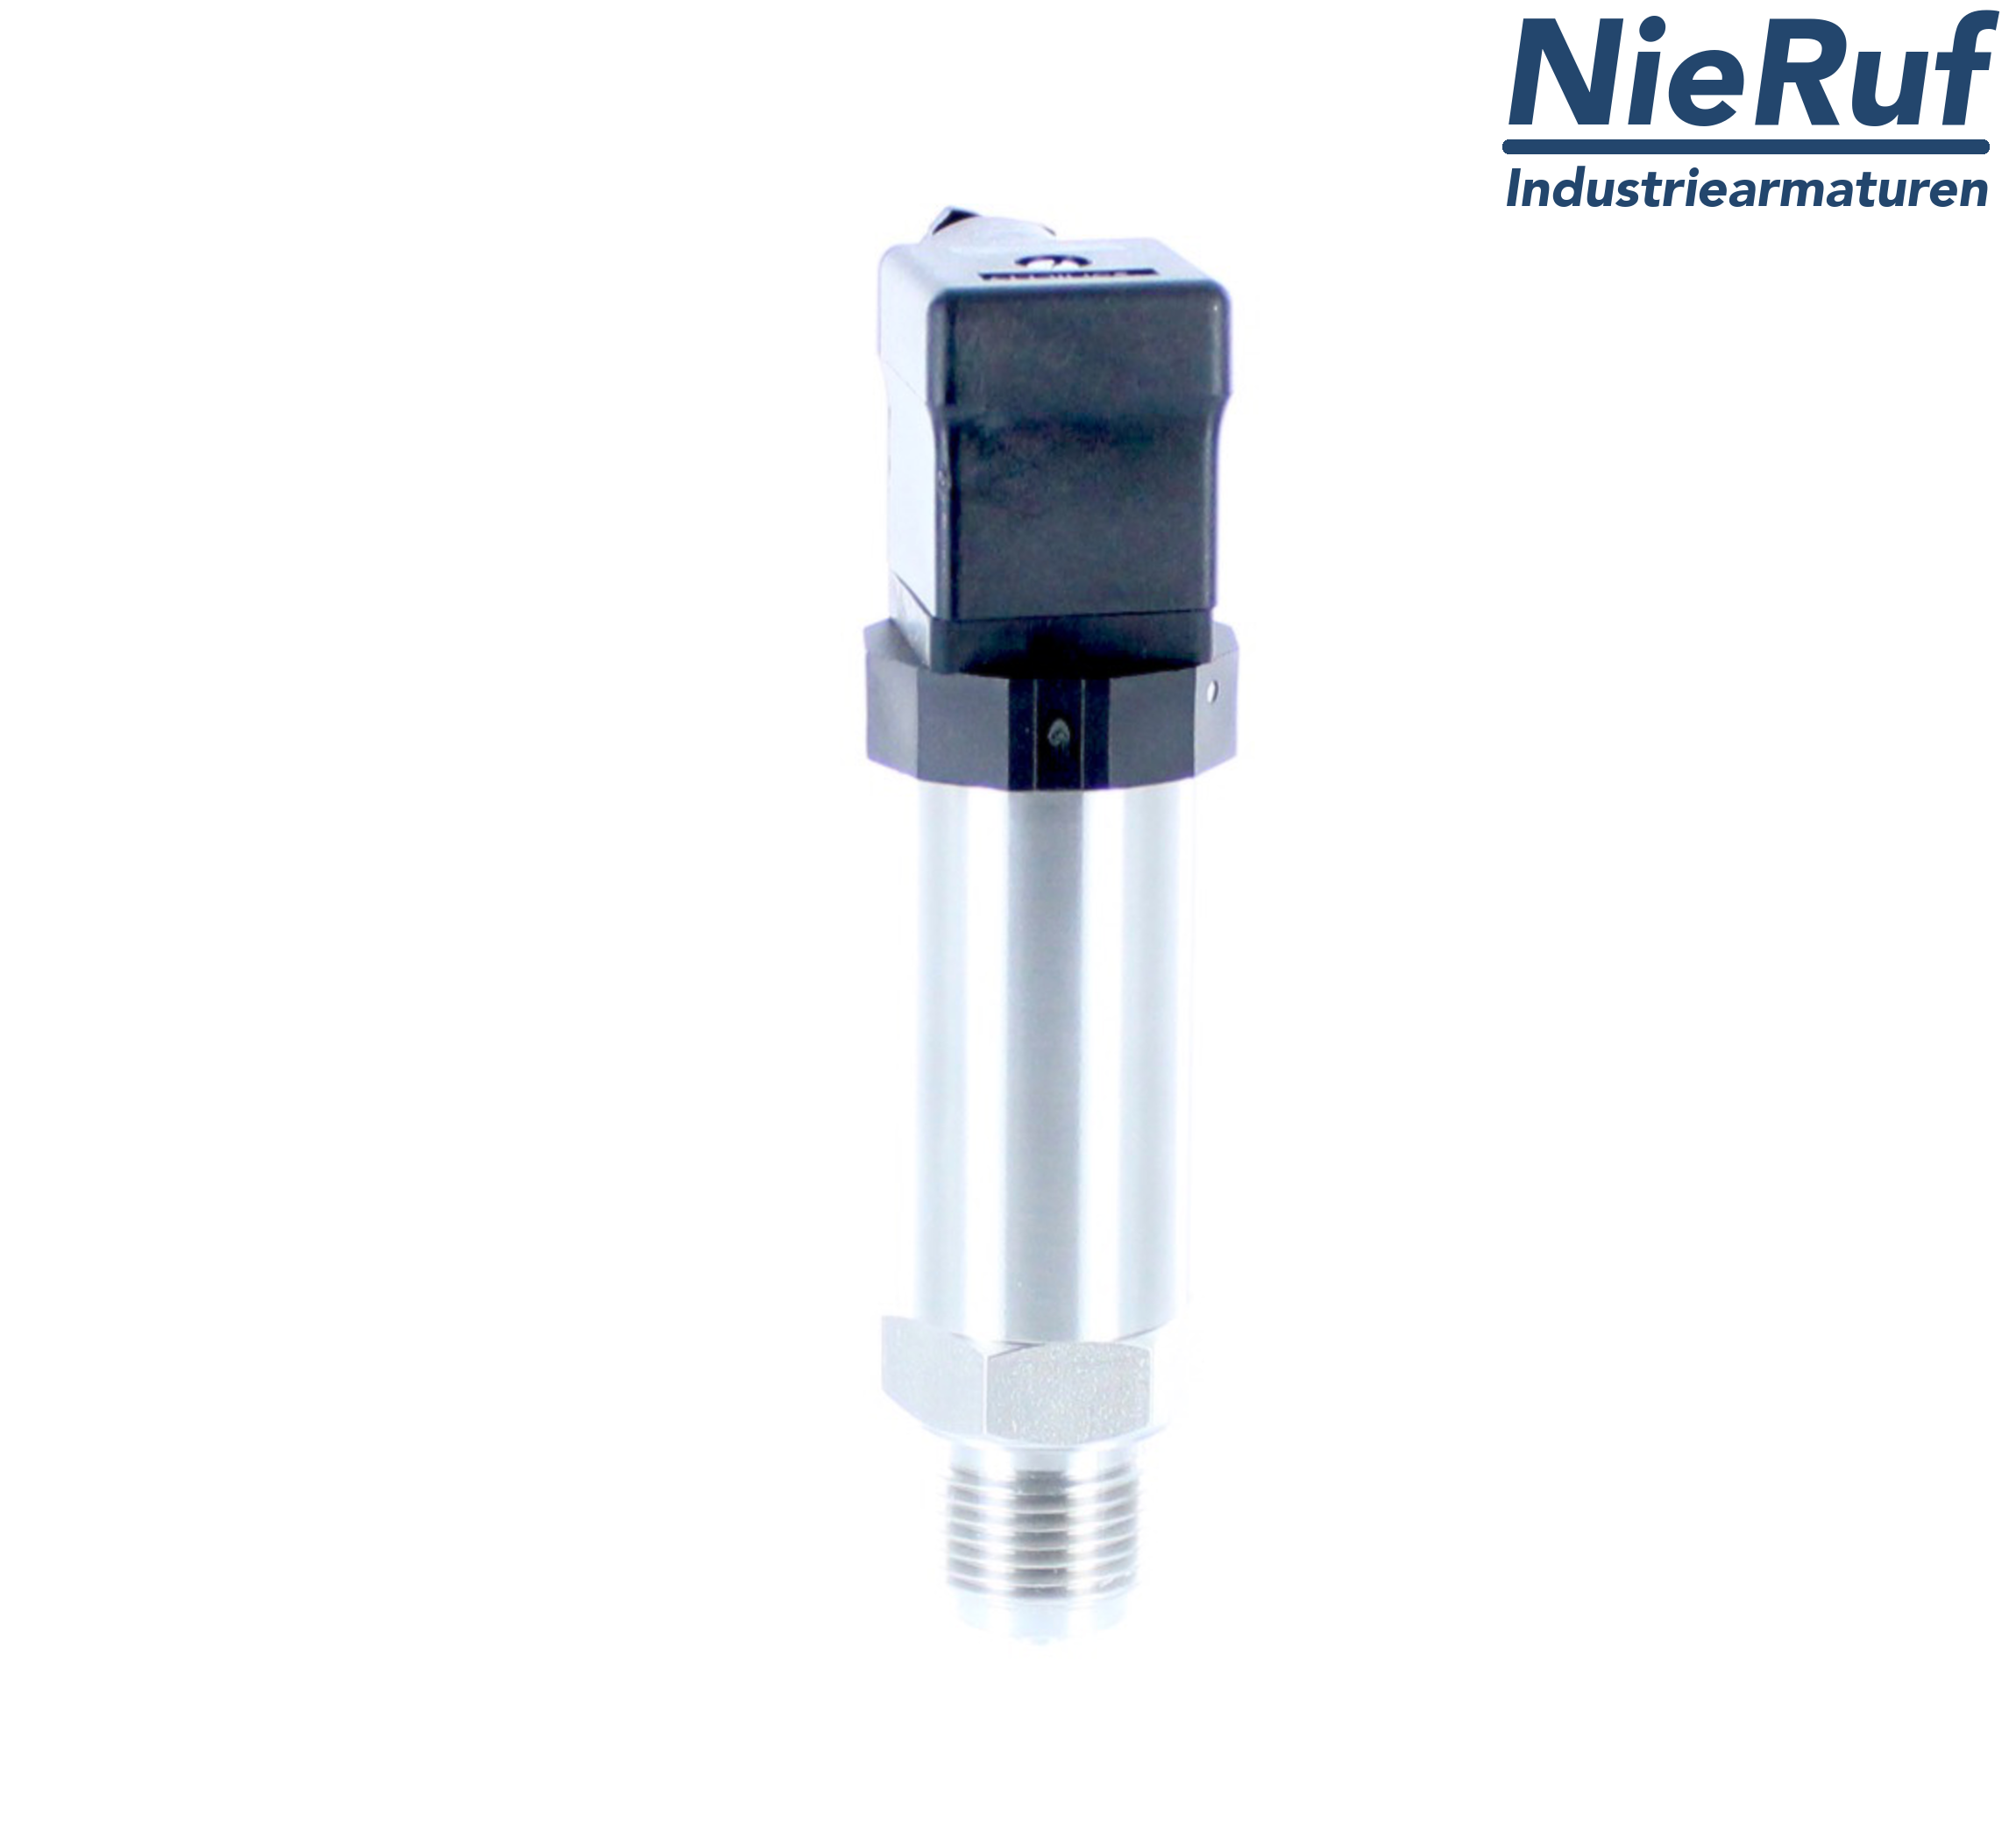 pressure sensor G 1/4" B DS01 stainless steel 2-wire: 4-20mA FPM 0,0 - 100,0 bar